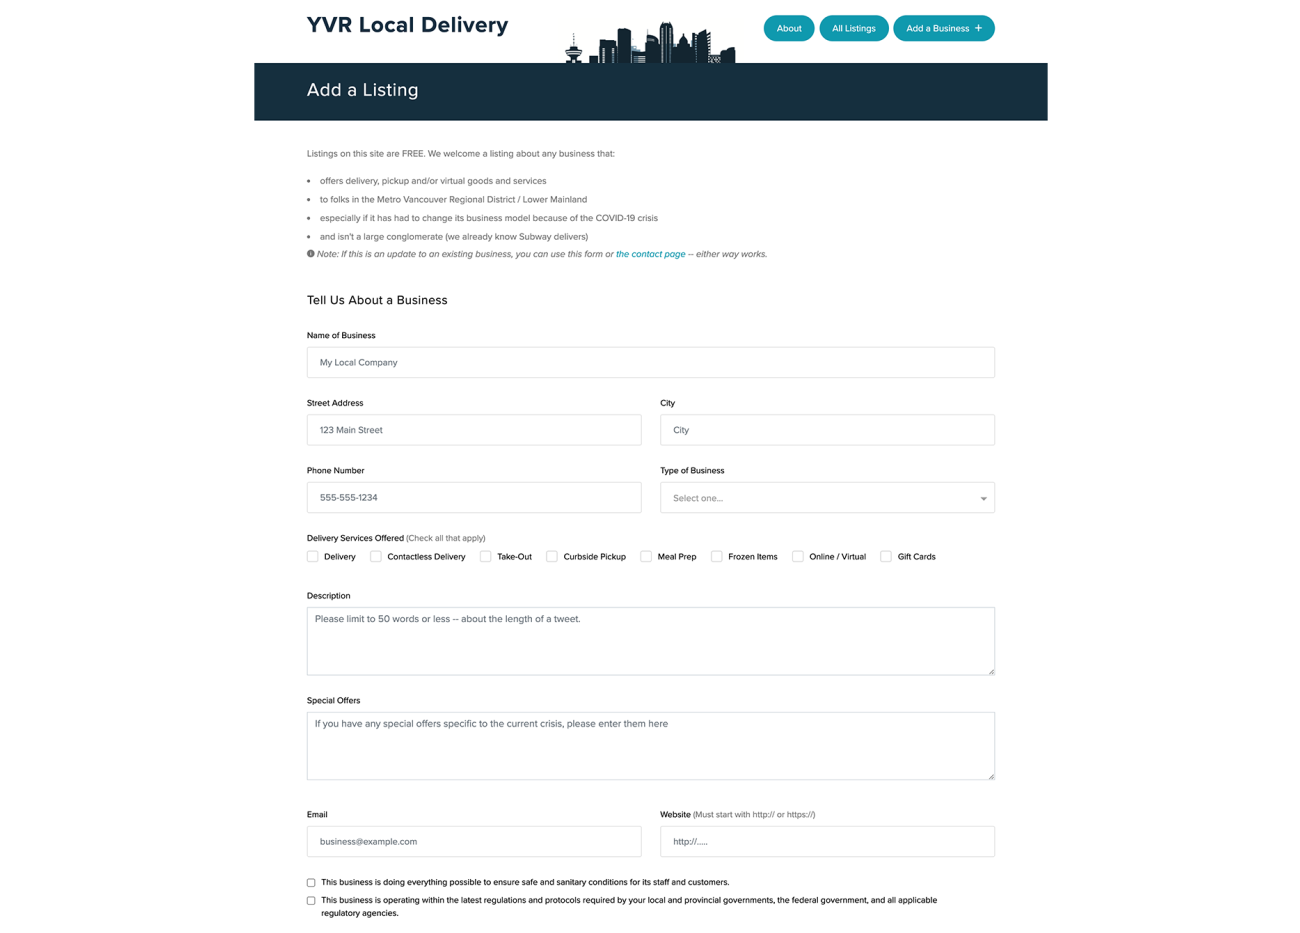 Screenshot of YVR Local Delivery Add a business page